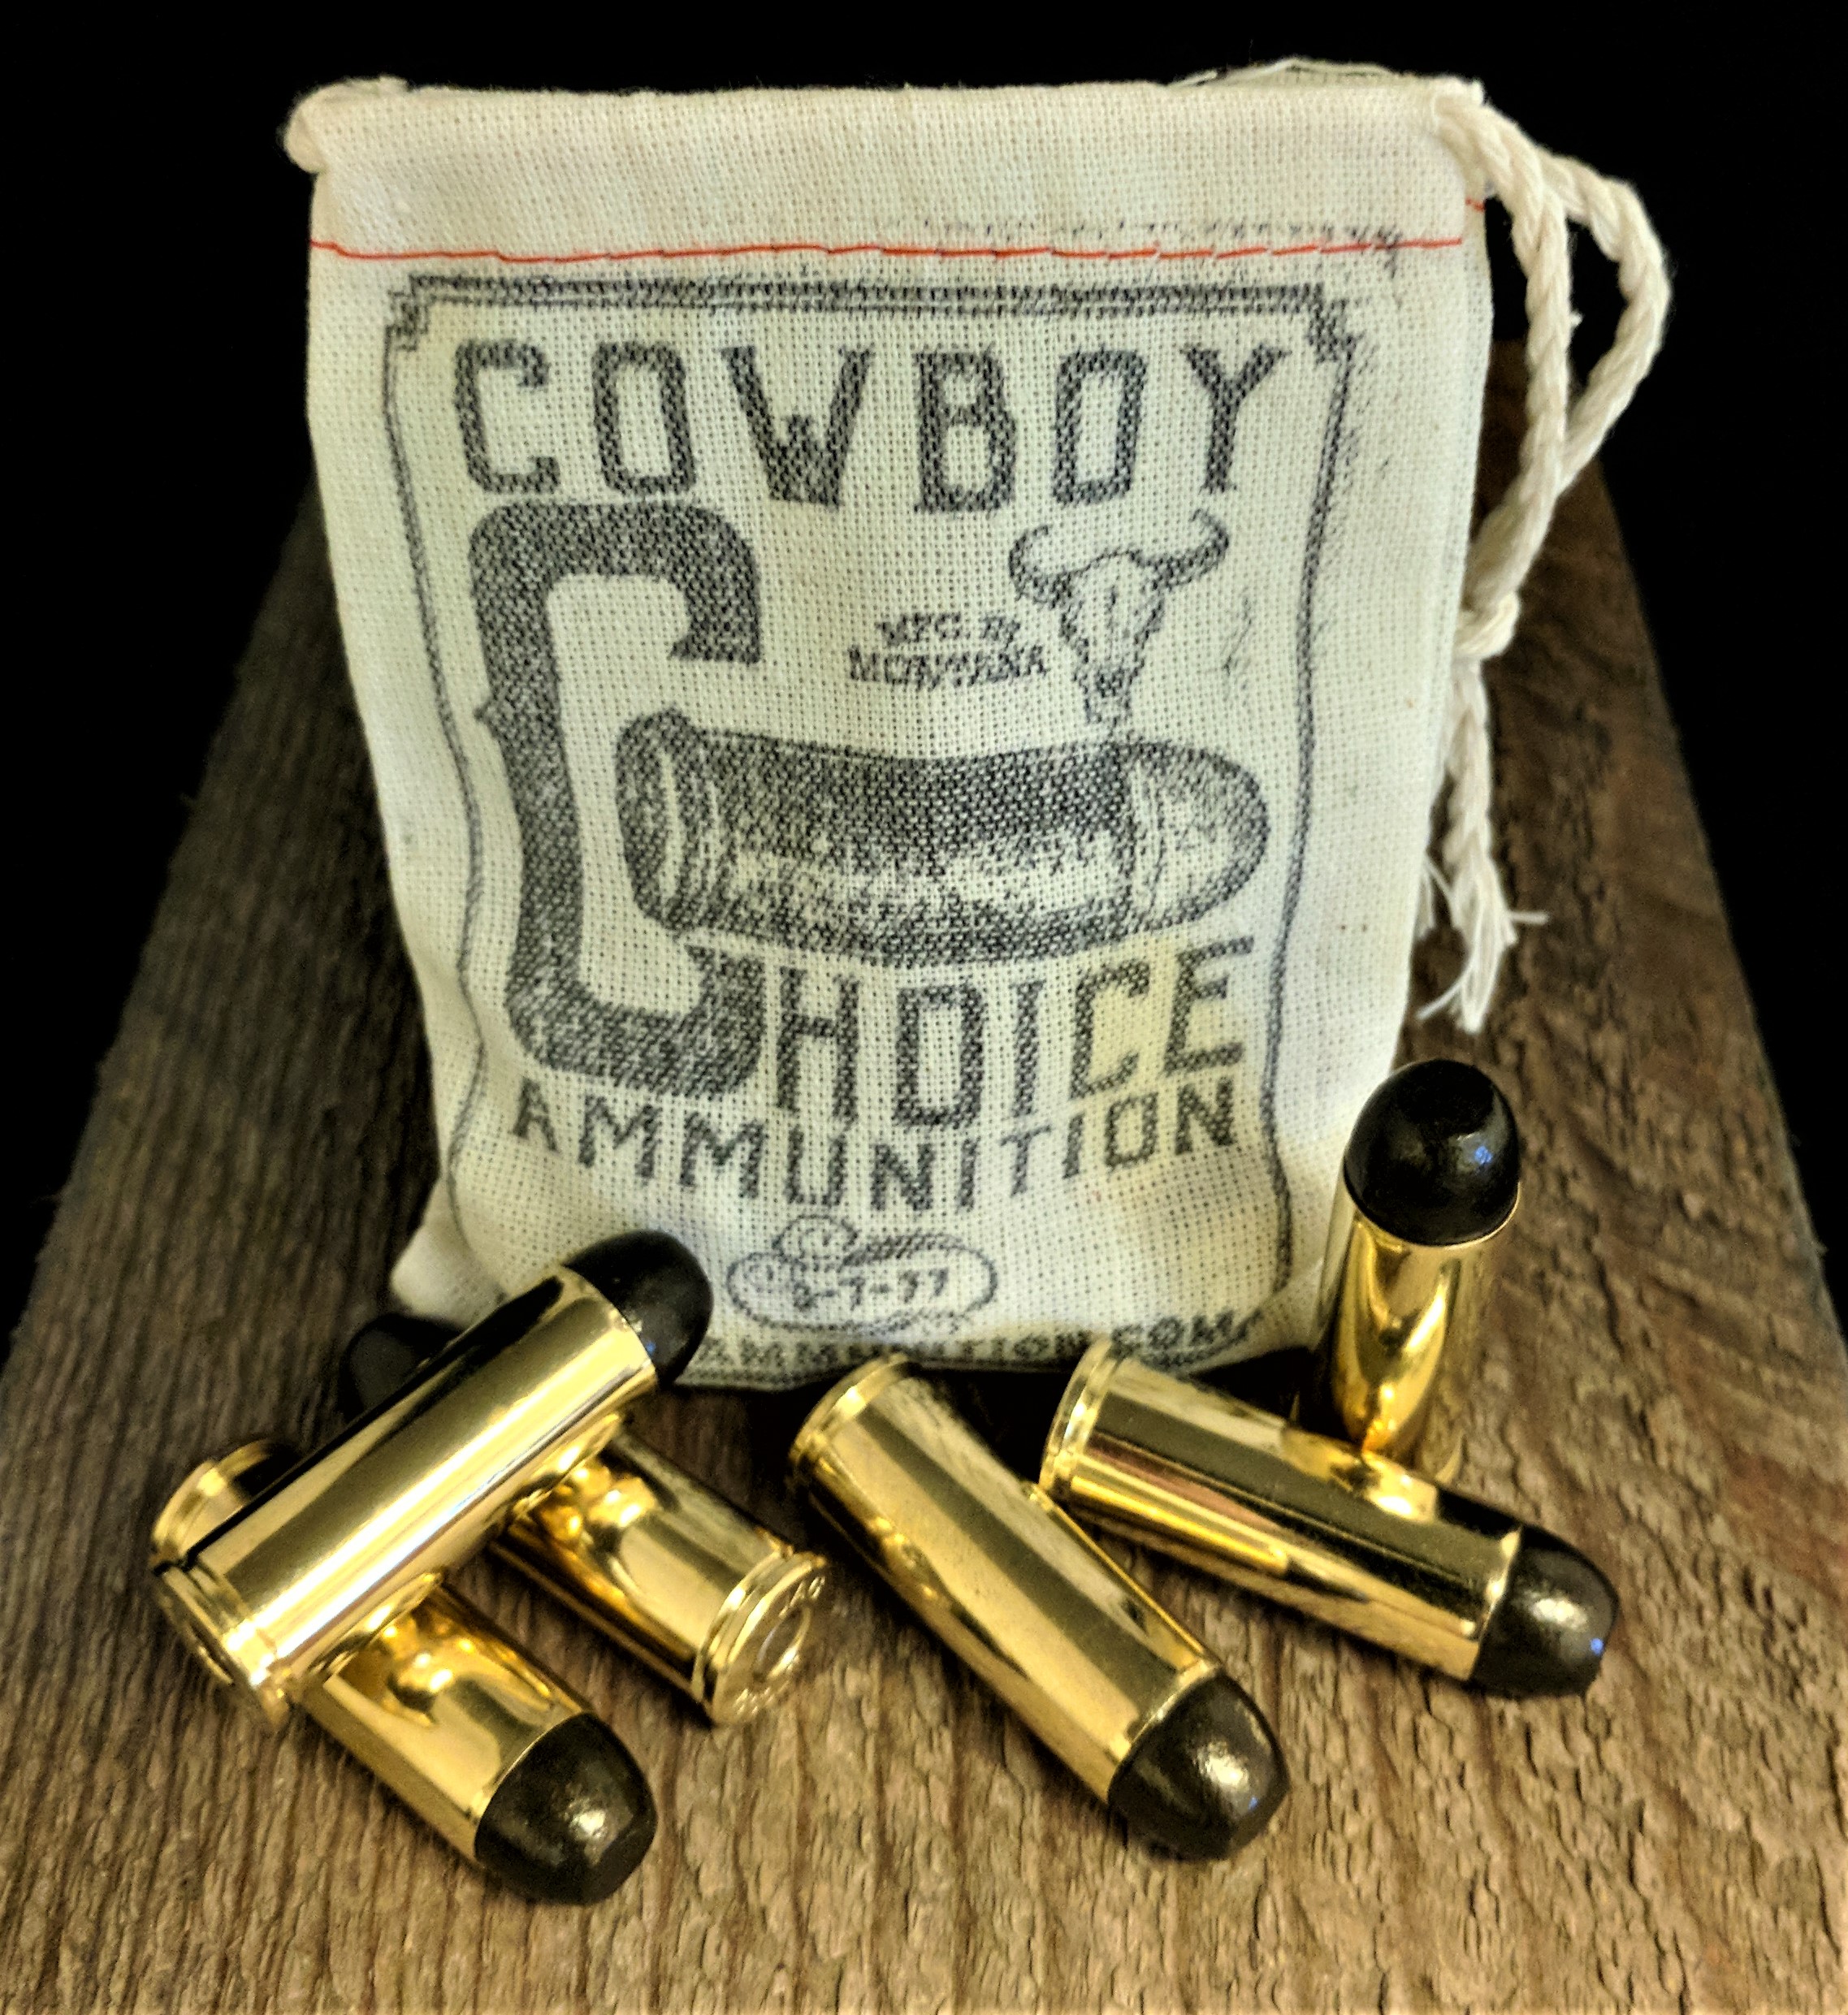 45 Long Colt vs 44 Magnum - What's the Better Round for You?